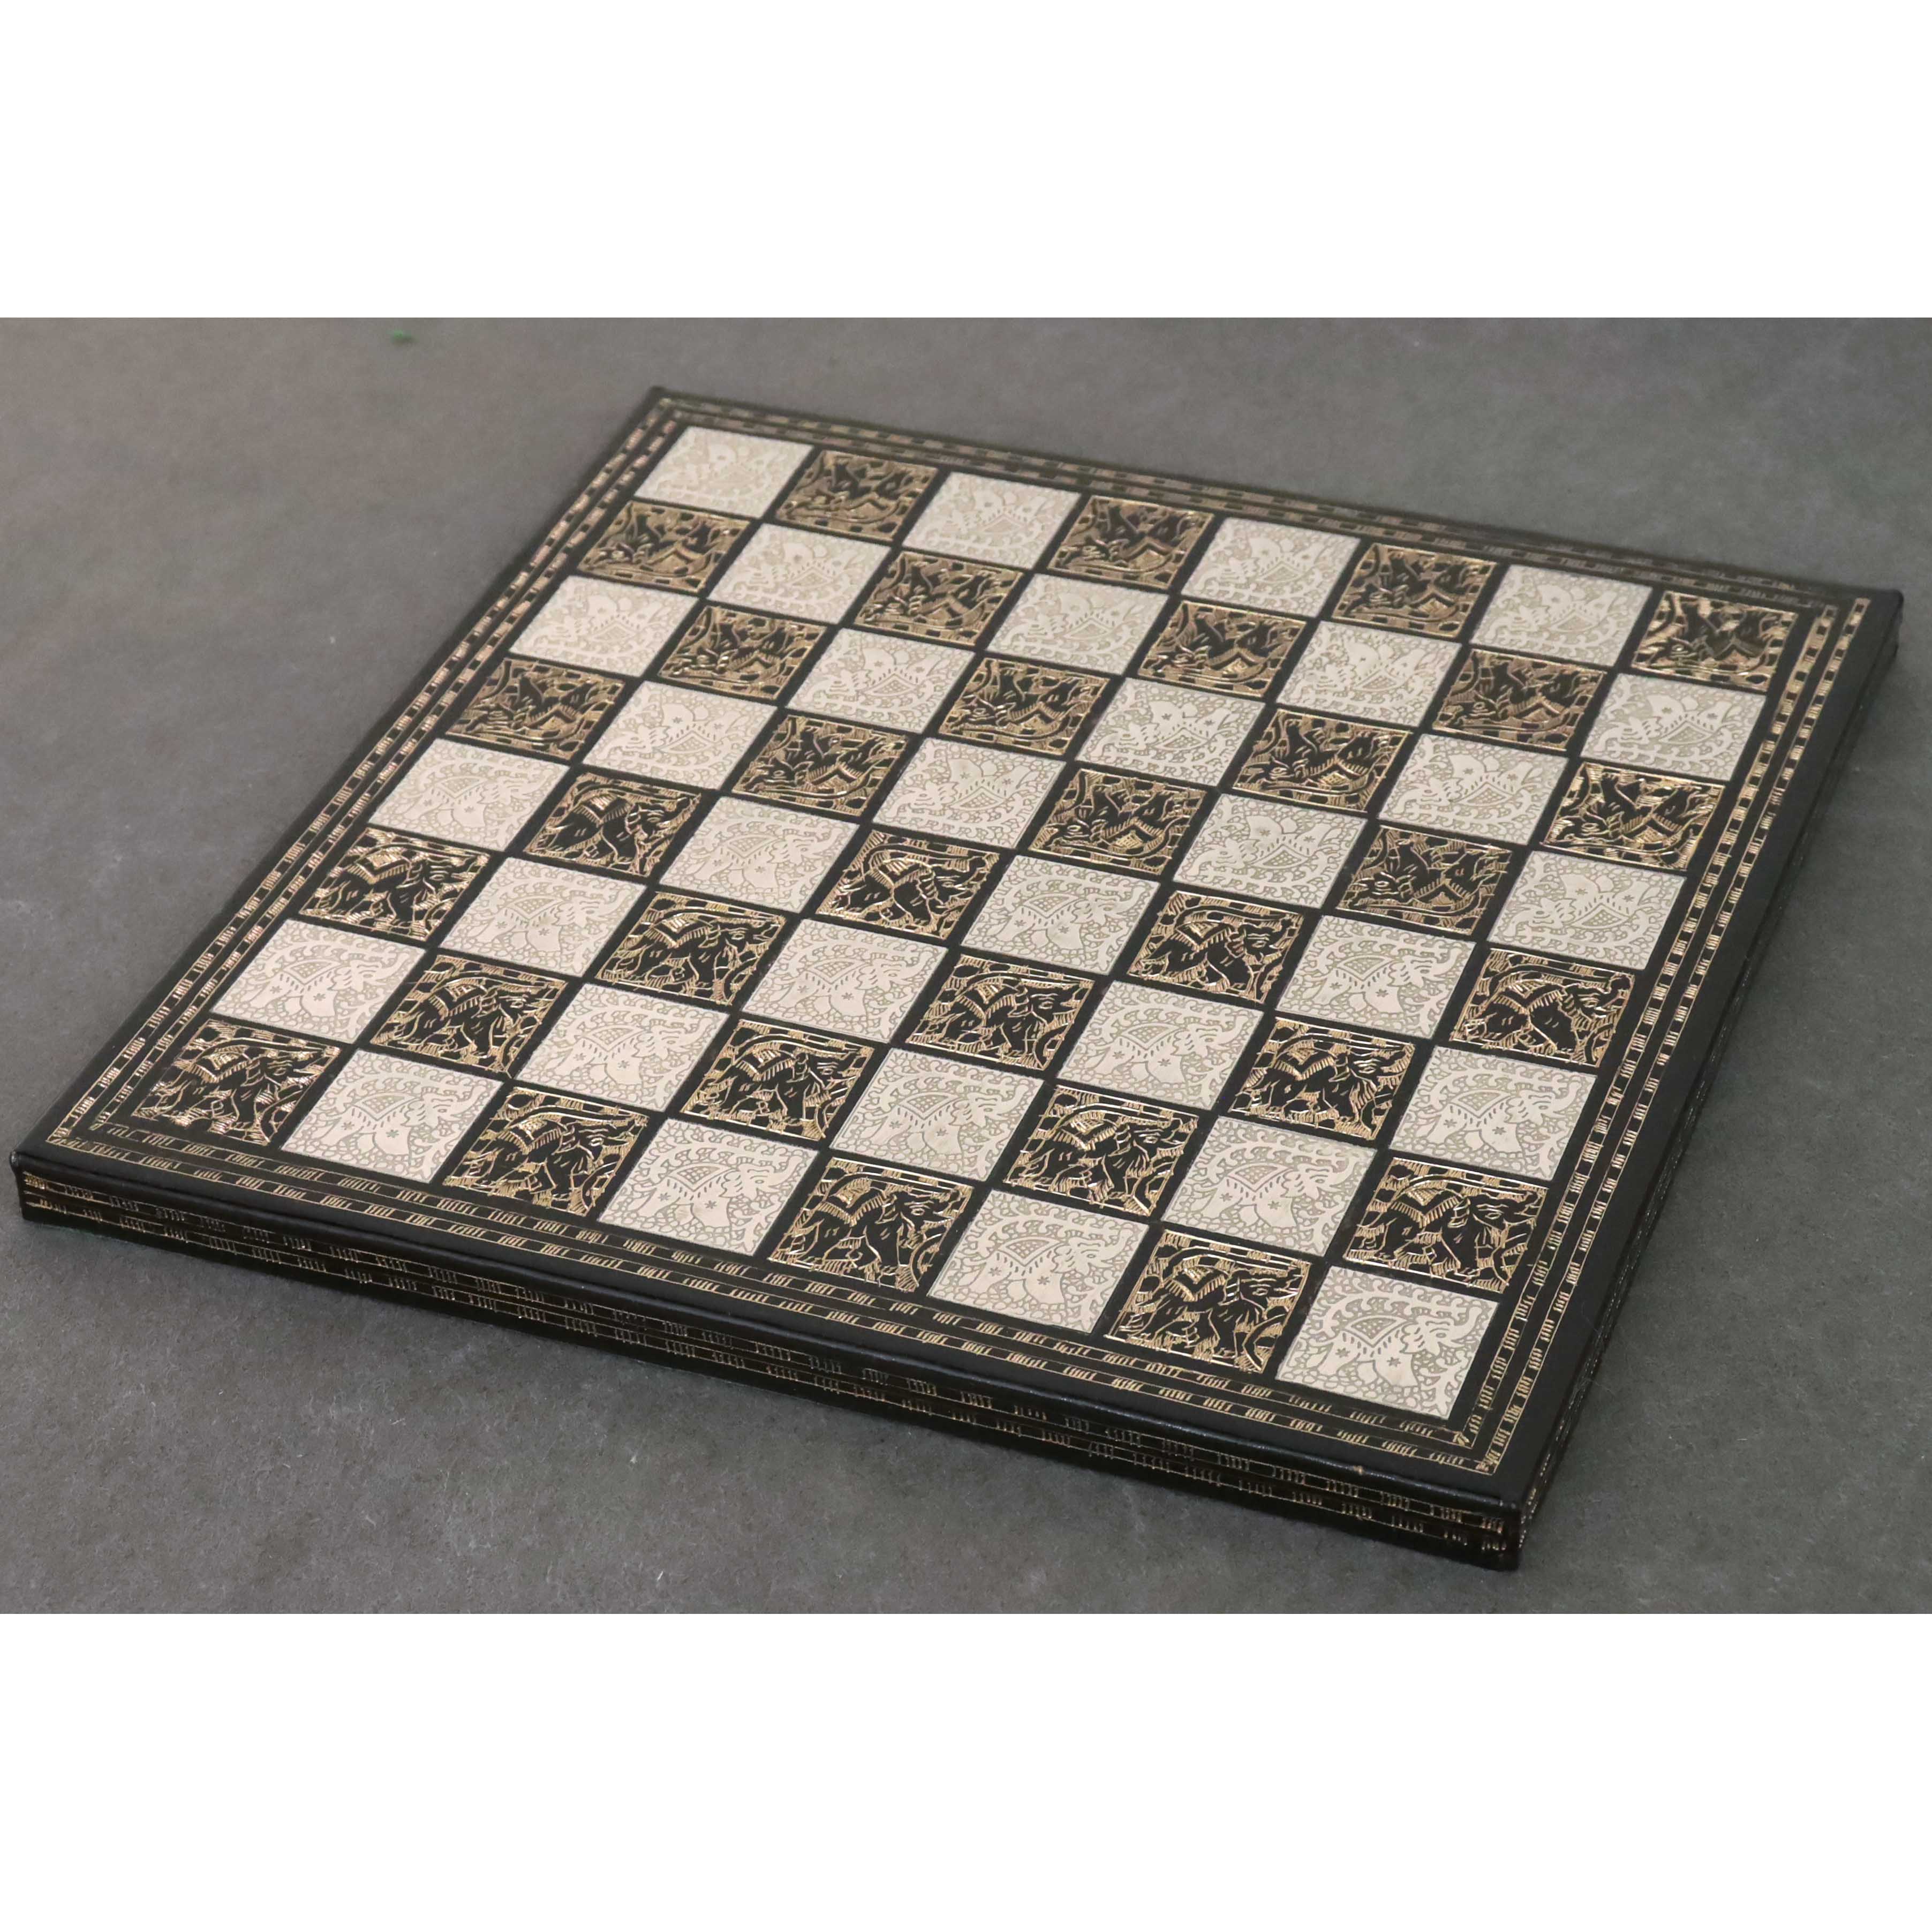 Table Gameboard with Chess and Draughts Top - Sovereign Play